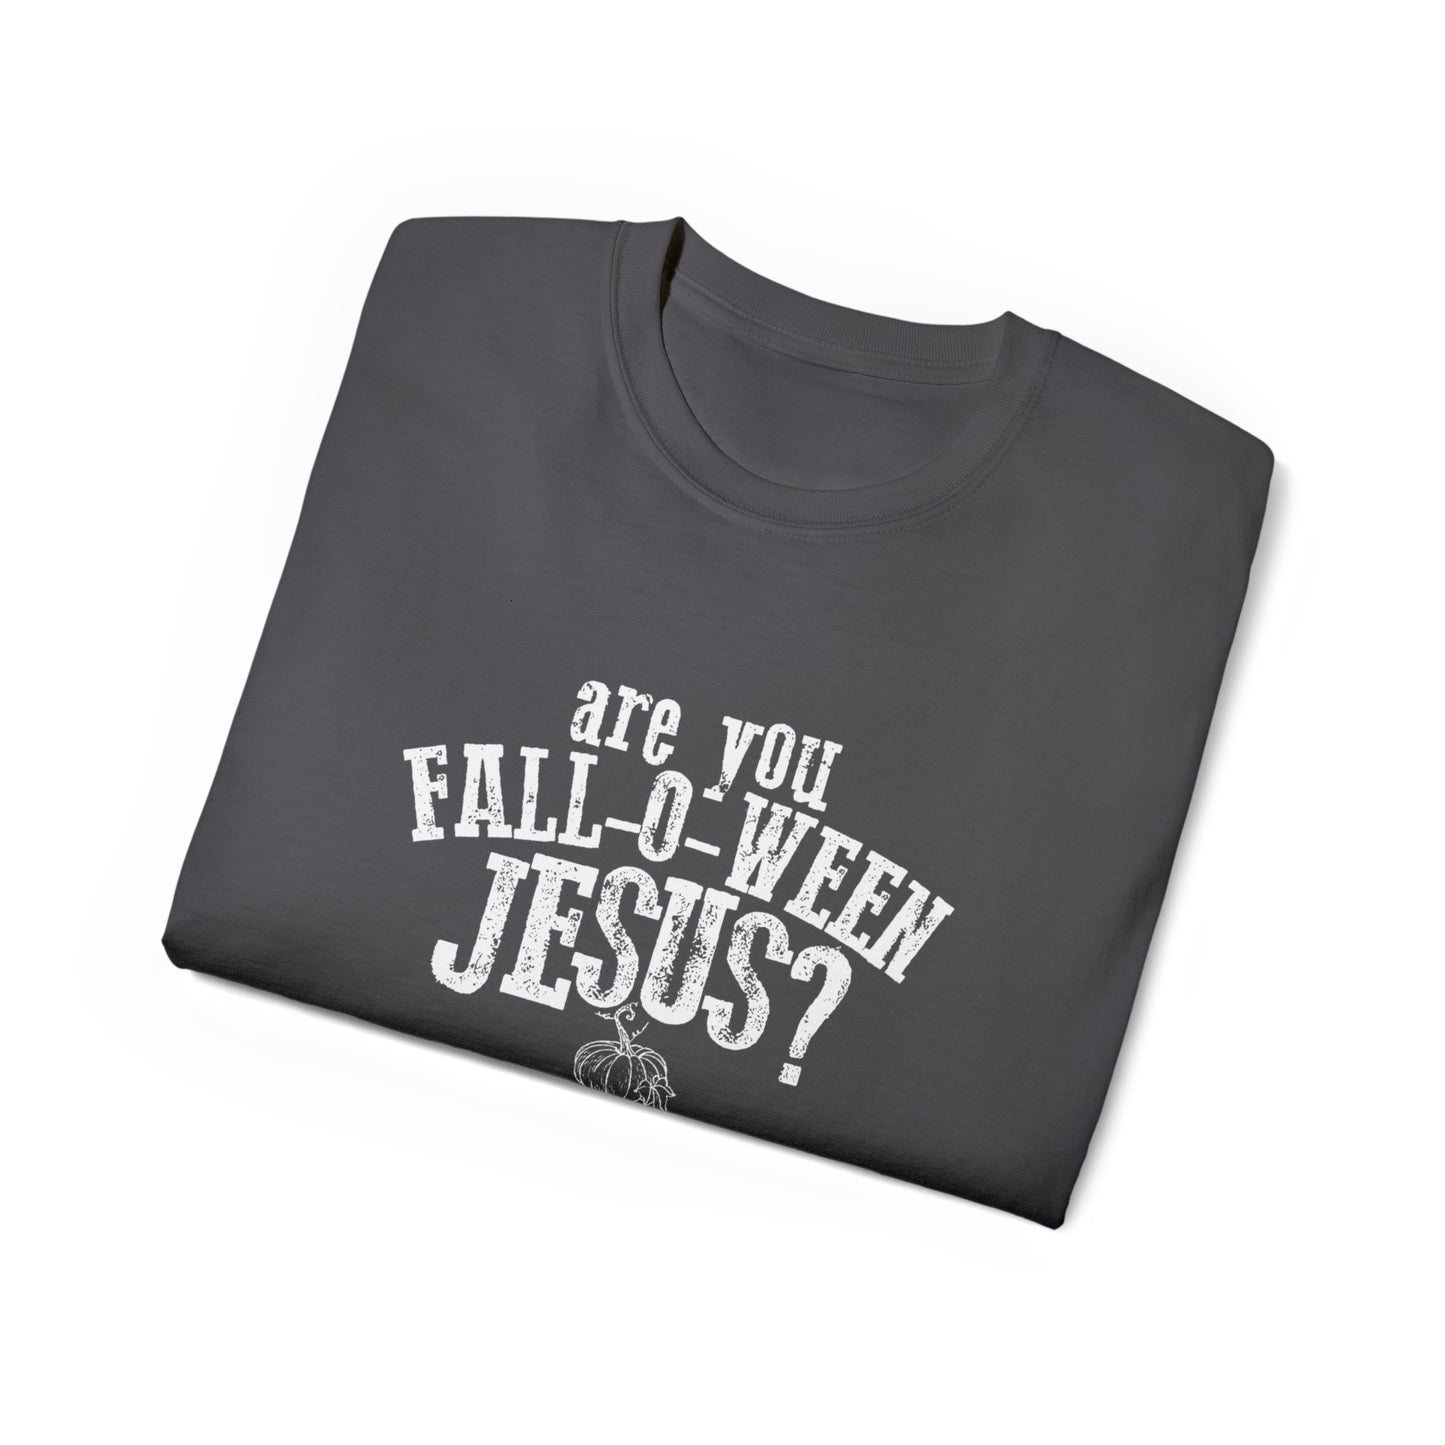 “Are You Fall-O-Ween Jesus?” T-Shirt